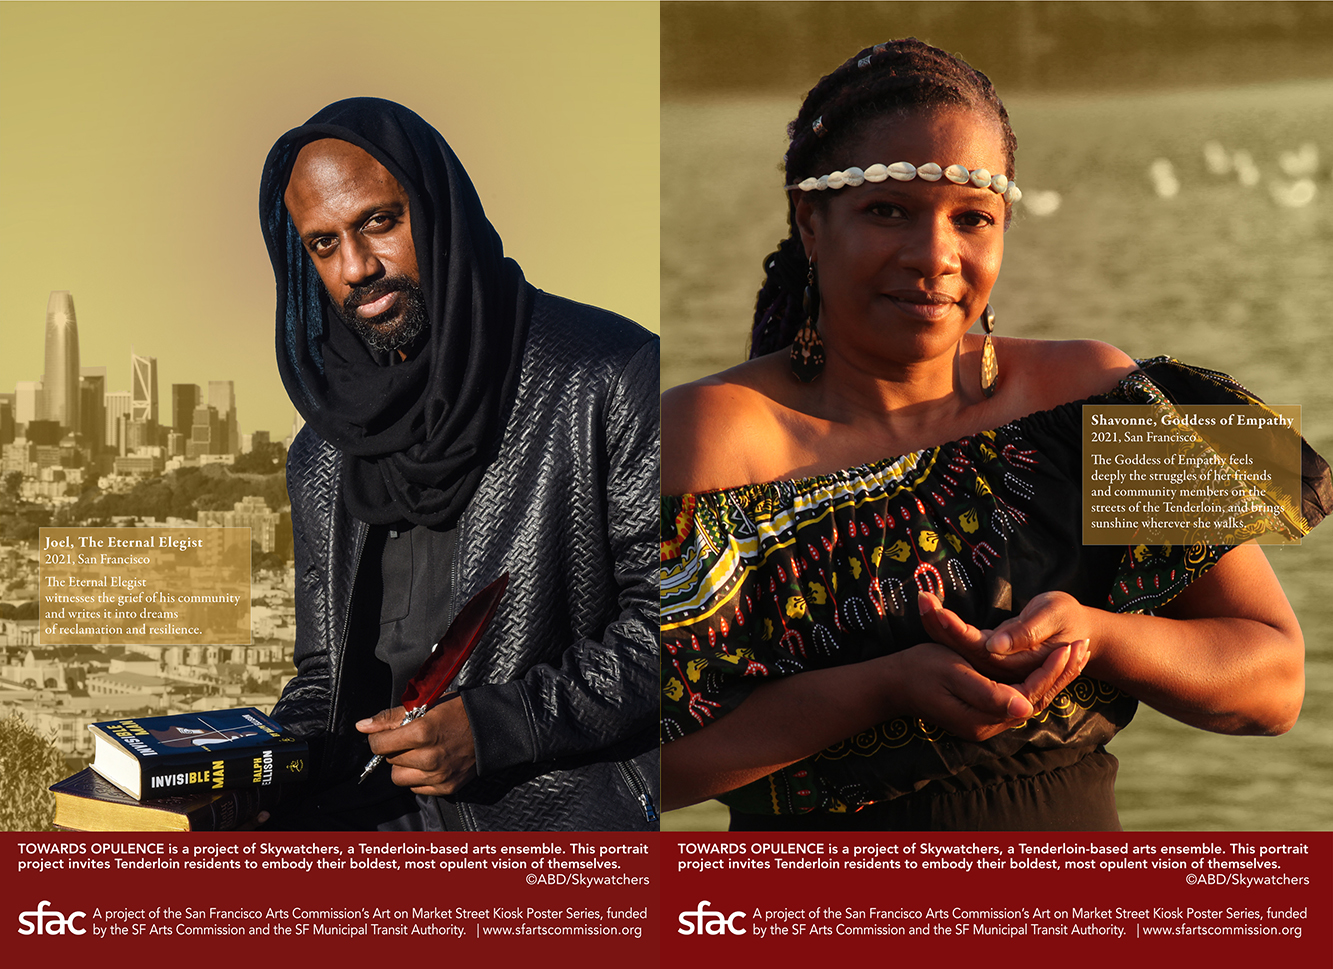 Side by side posters from The Opulence Project. On the left is a black man, wearing all black, with a scarf over his head, looking forward and holding books and a quill. On the right is a black woman wearing a patterned off the shoulder top, looking forward with both her hands cupped holding something. She wears a cowrie headband.